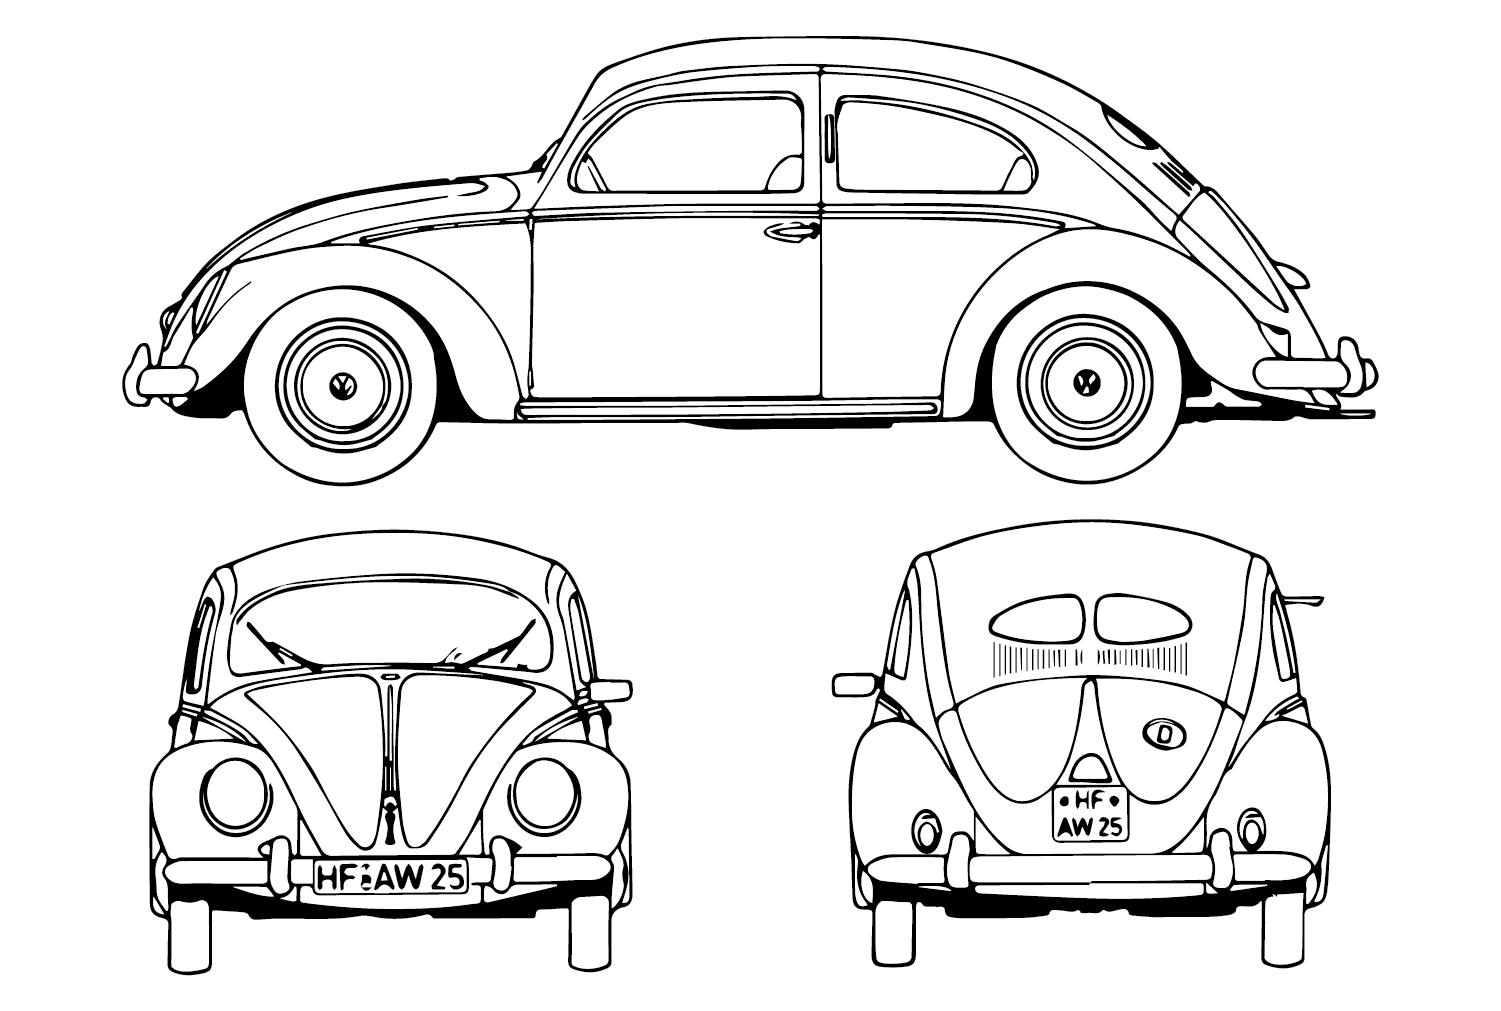 VW Beetle Coloring Page - Free Printable Coloring Pages